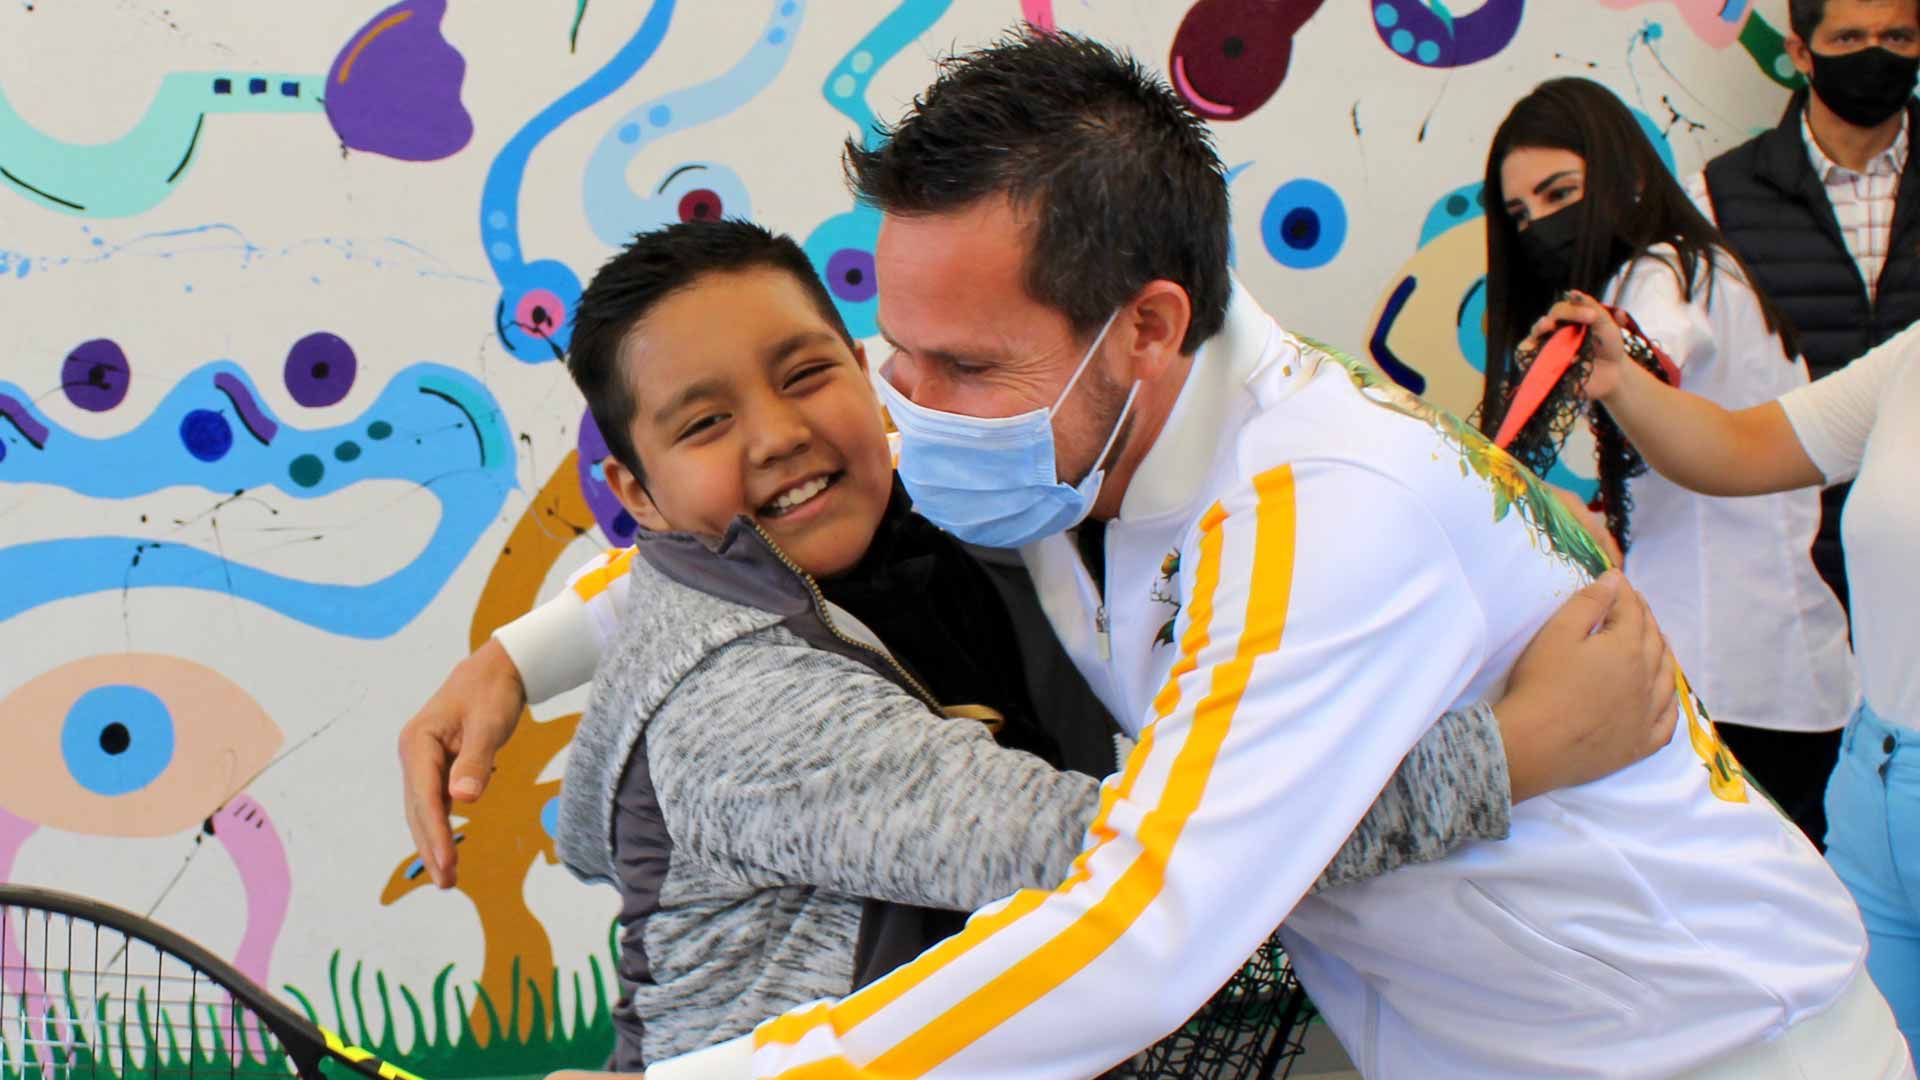 Miguel Angel Reyes-Varela hugs a child during charity activities in Mexico City.